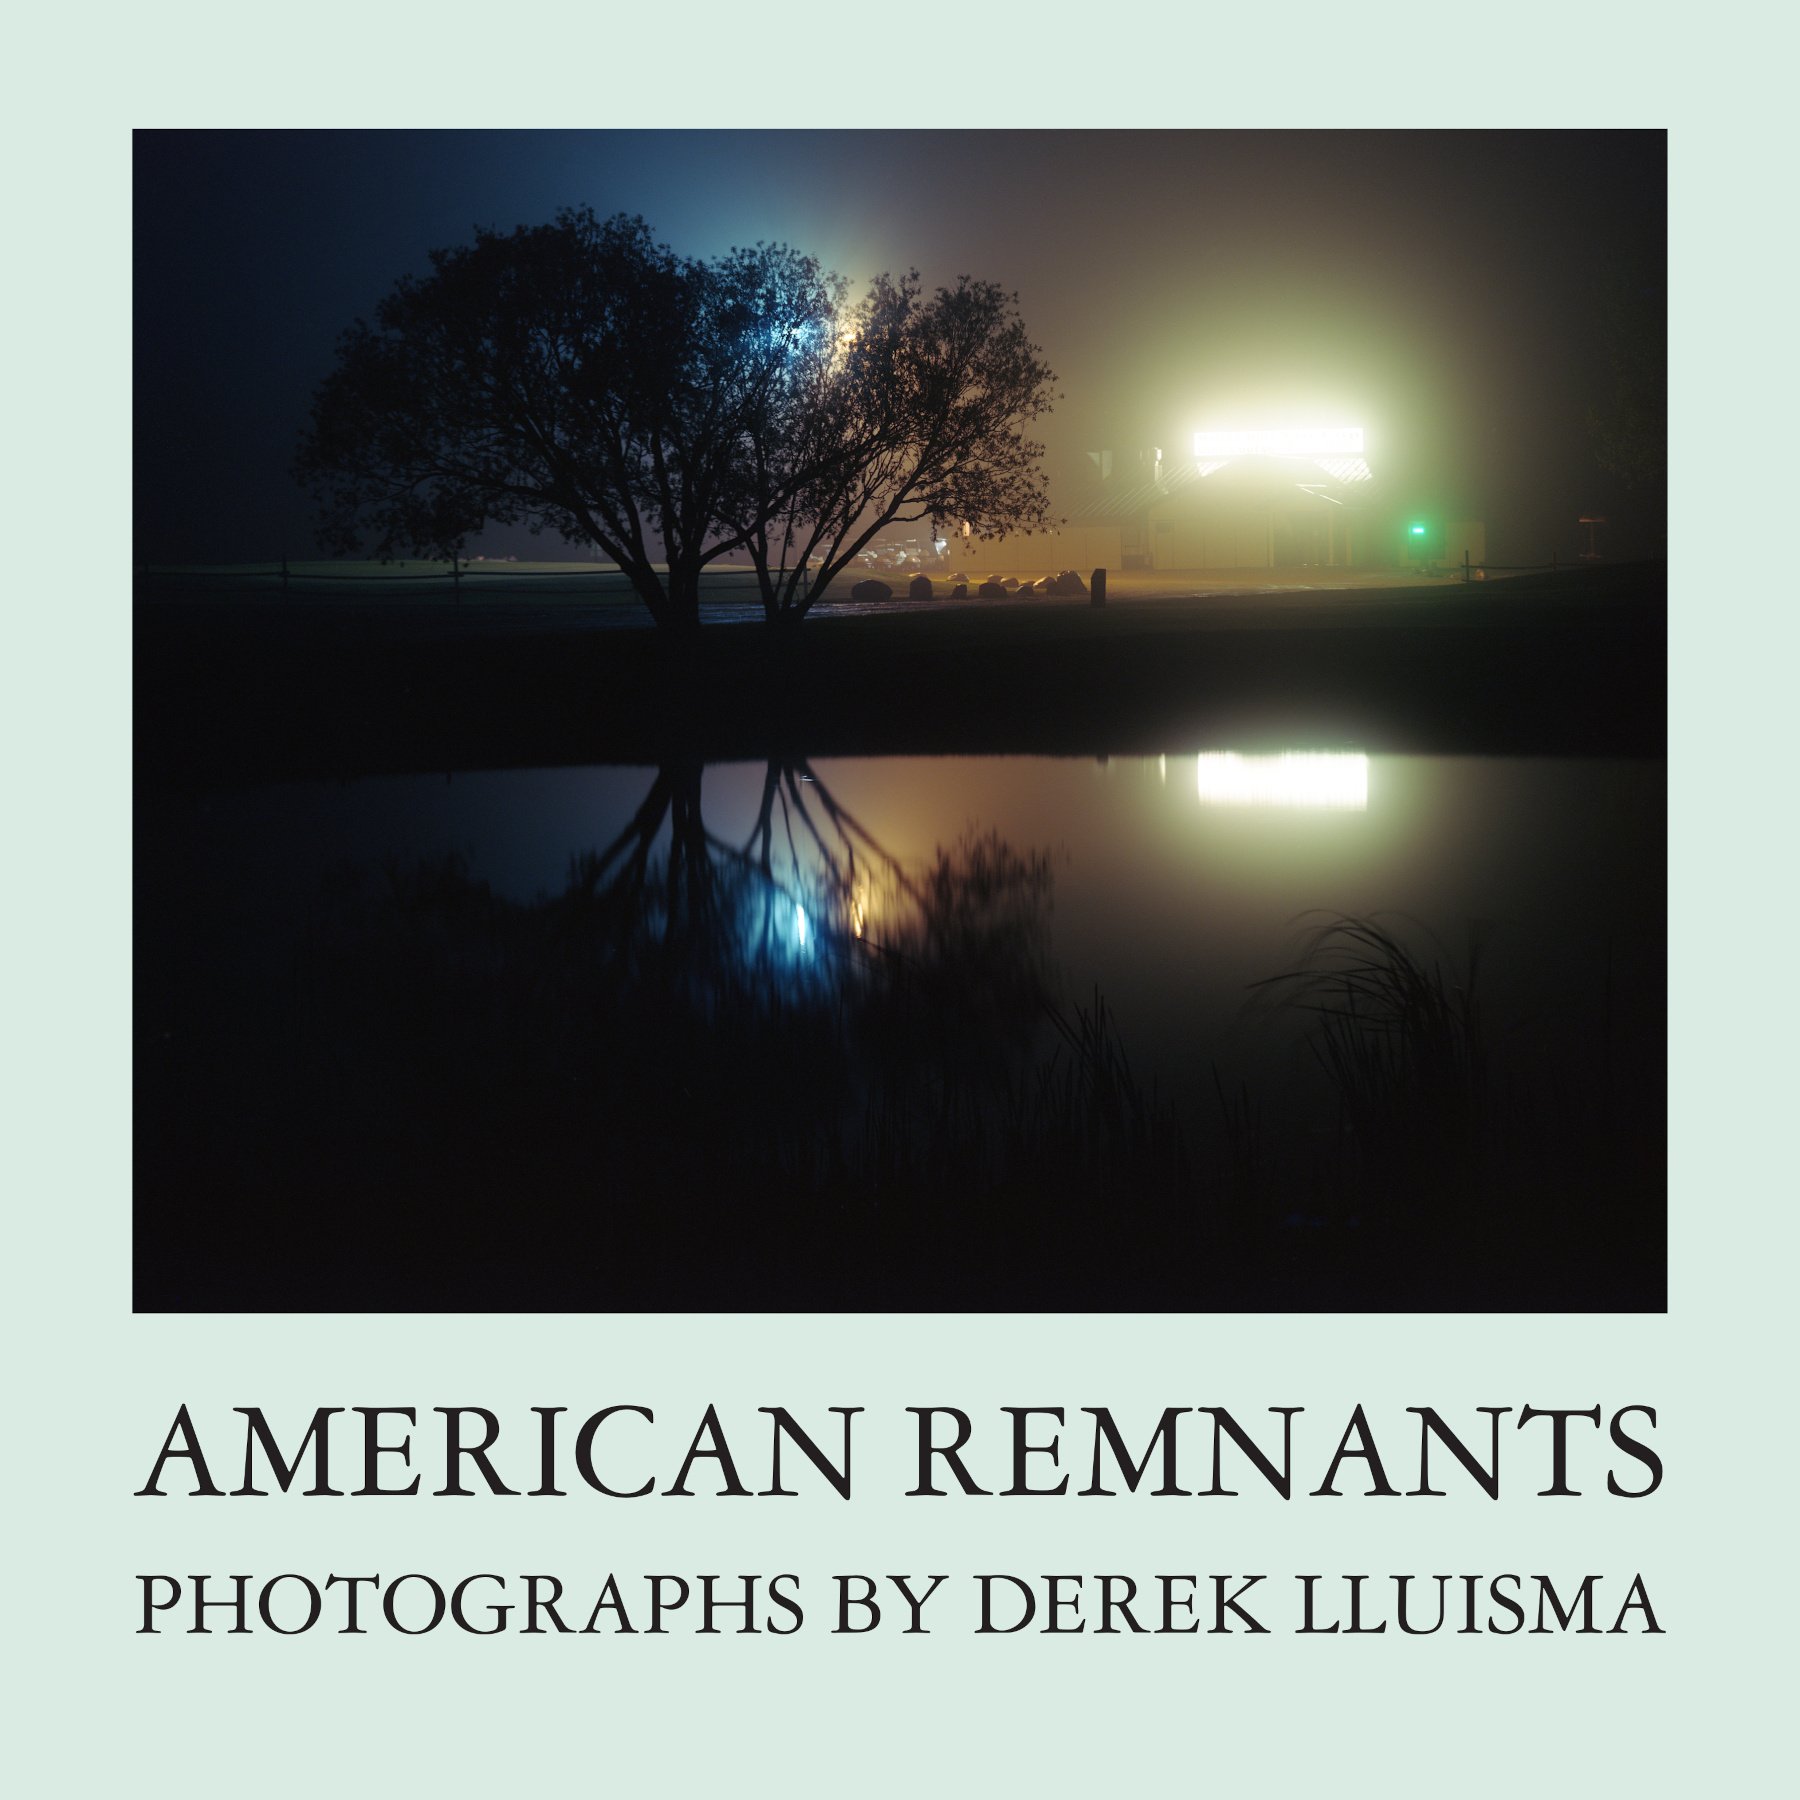 American-Remnants-1st-Edition_cover_front_1800.jpg